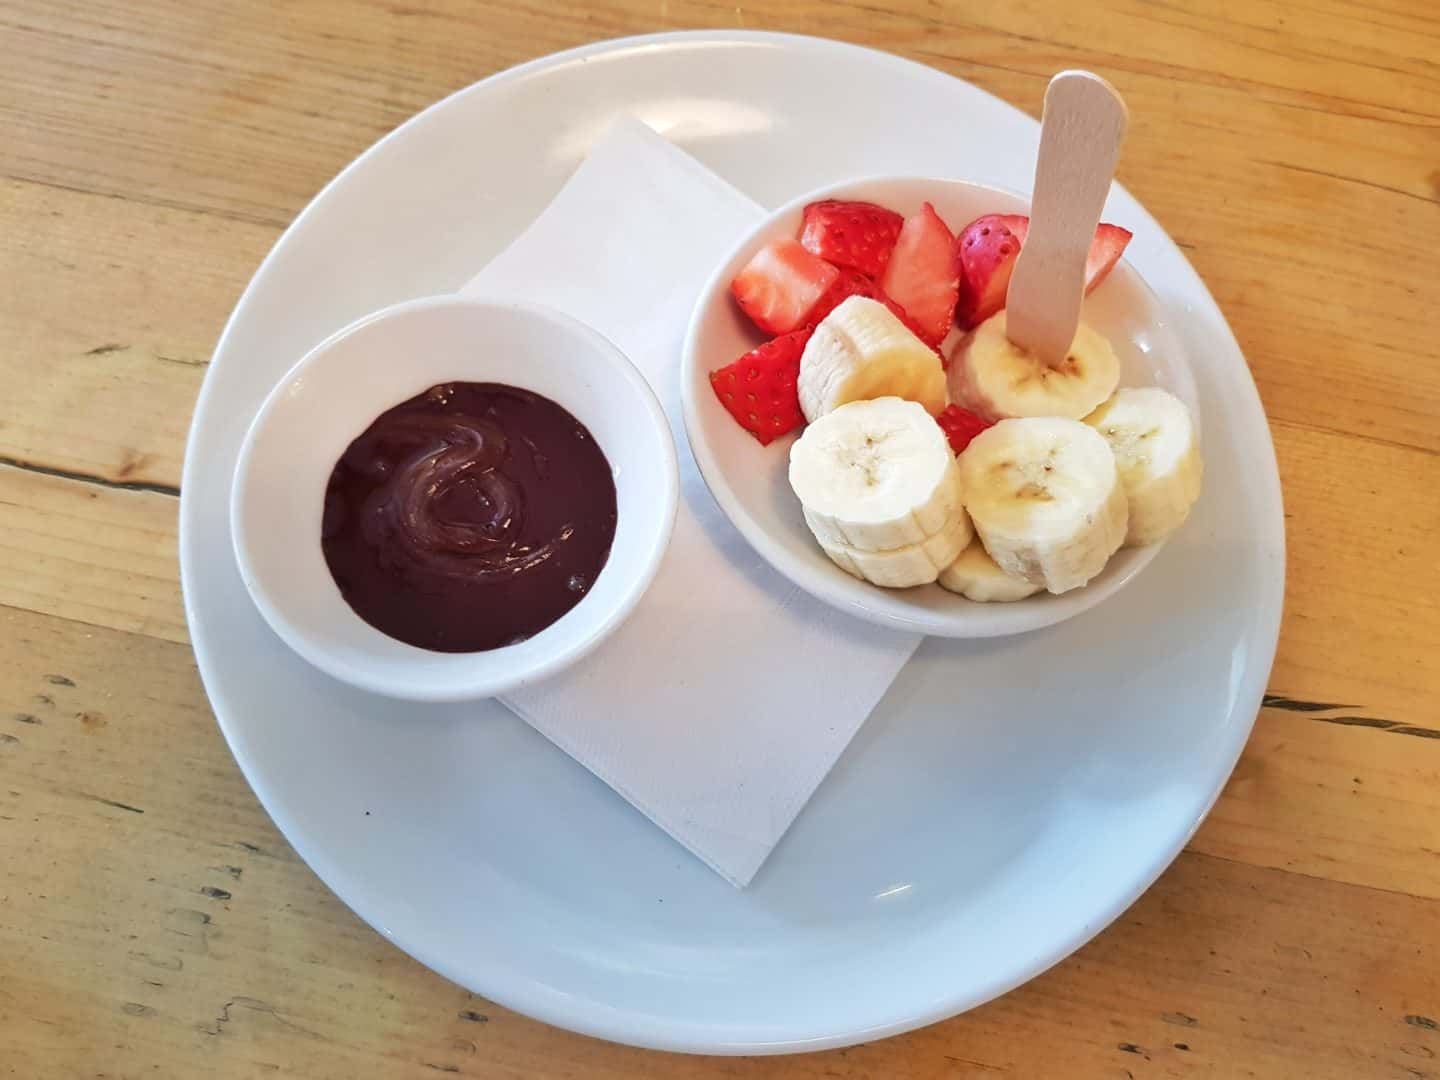 Crowngate Shopping Centre Worcester kids club Bill's restaurant dessert kids bananas and strawberries with chocolate